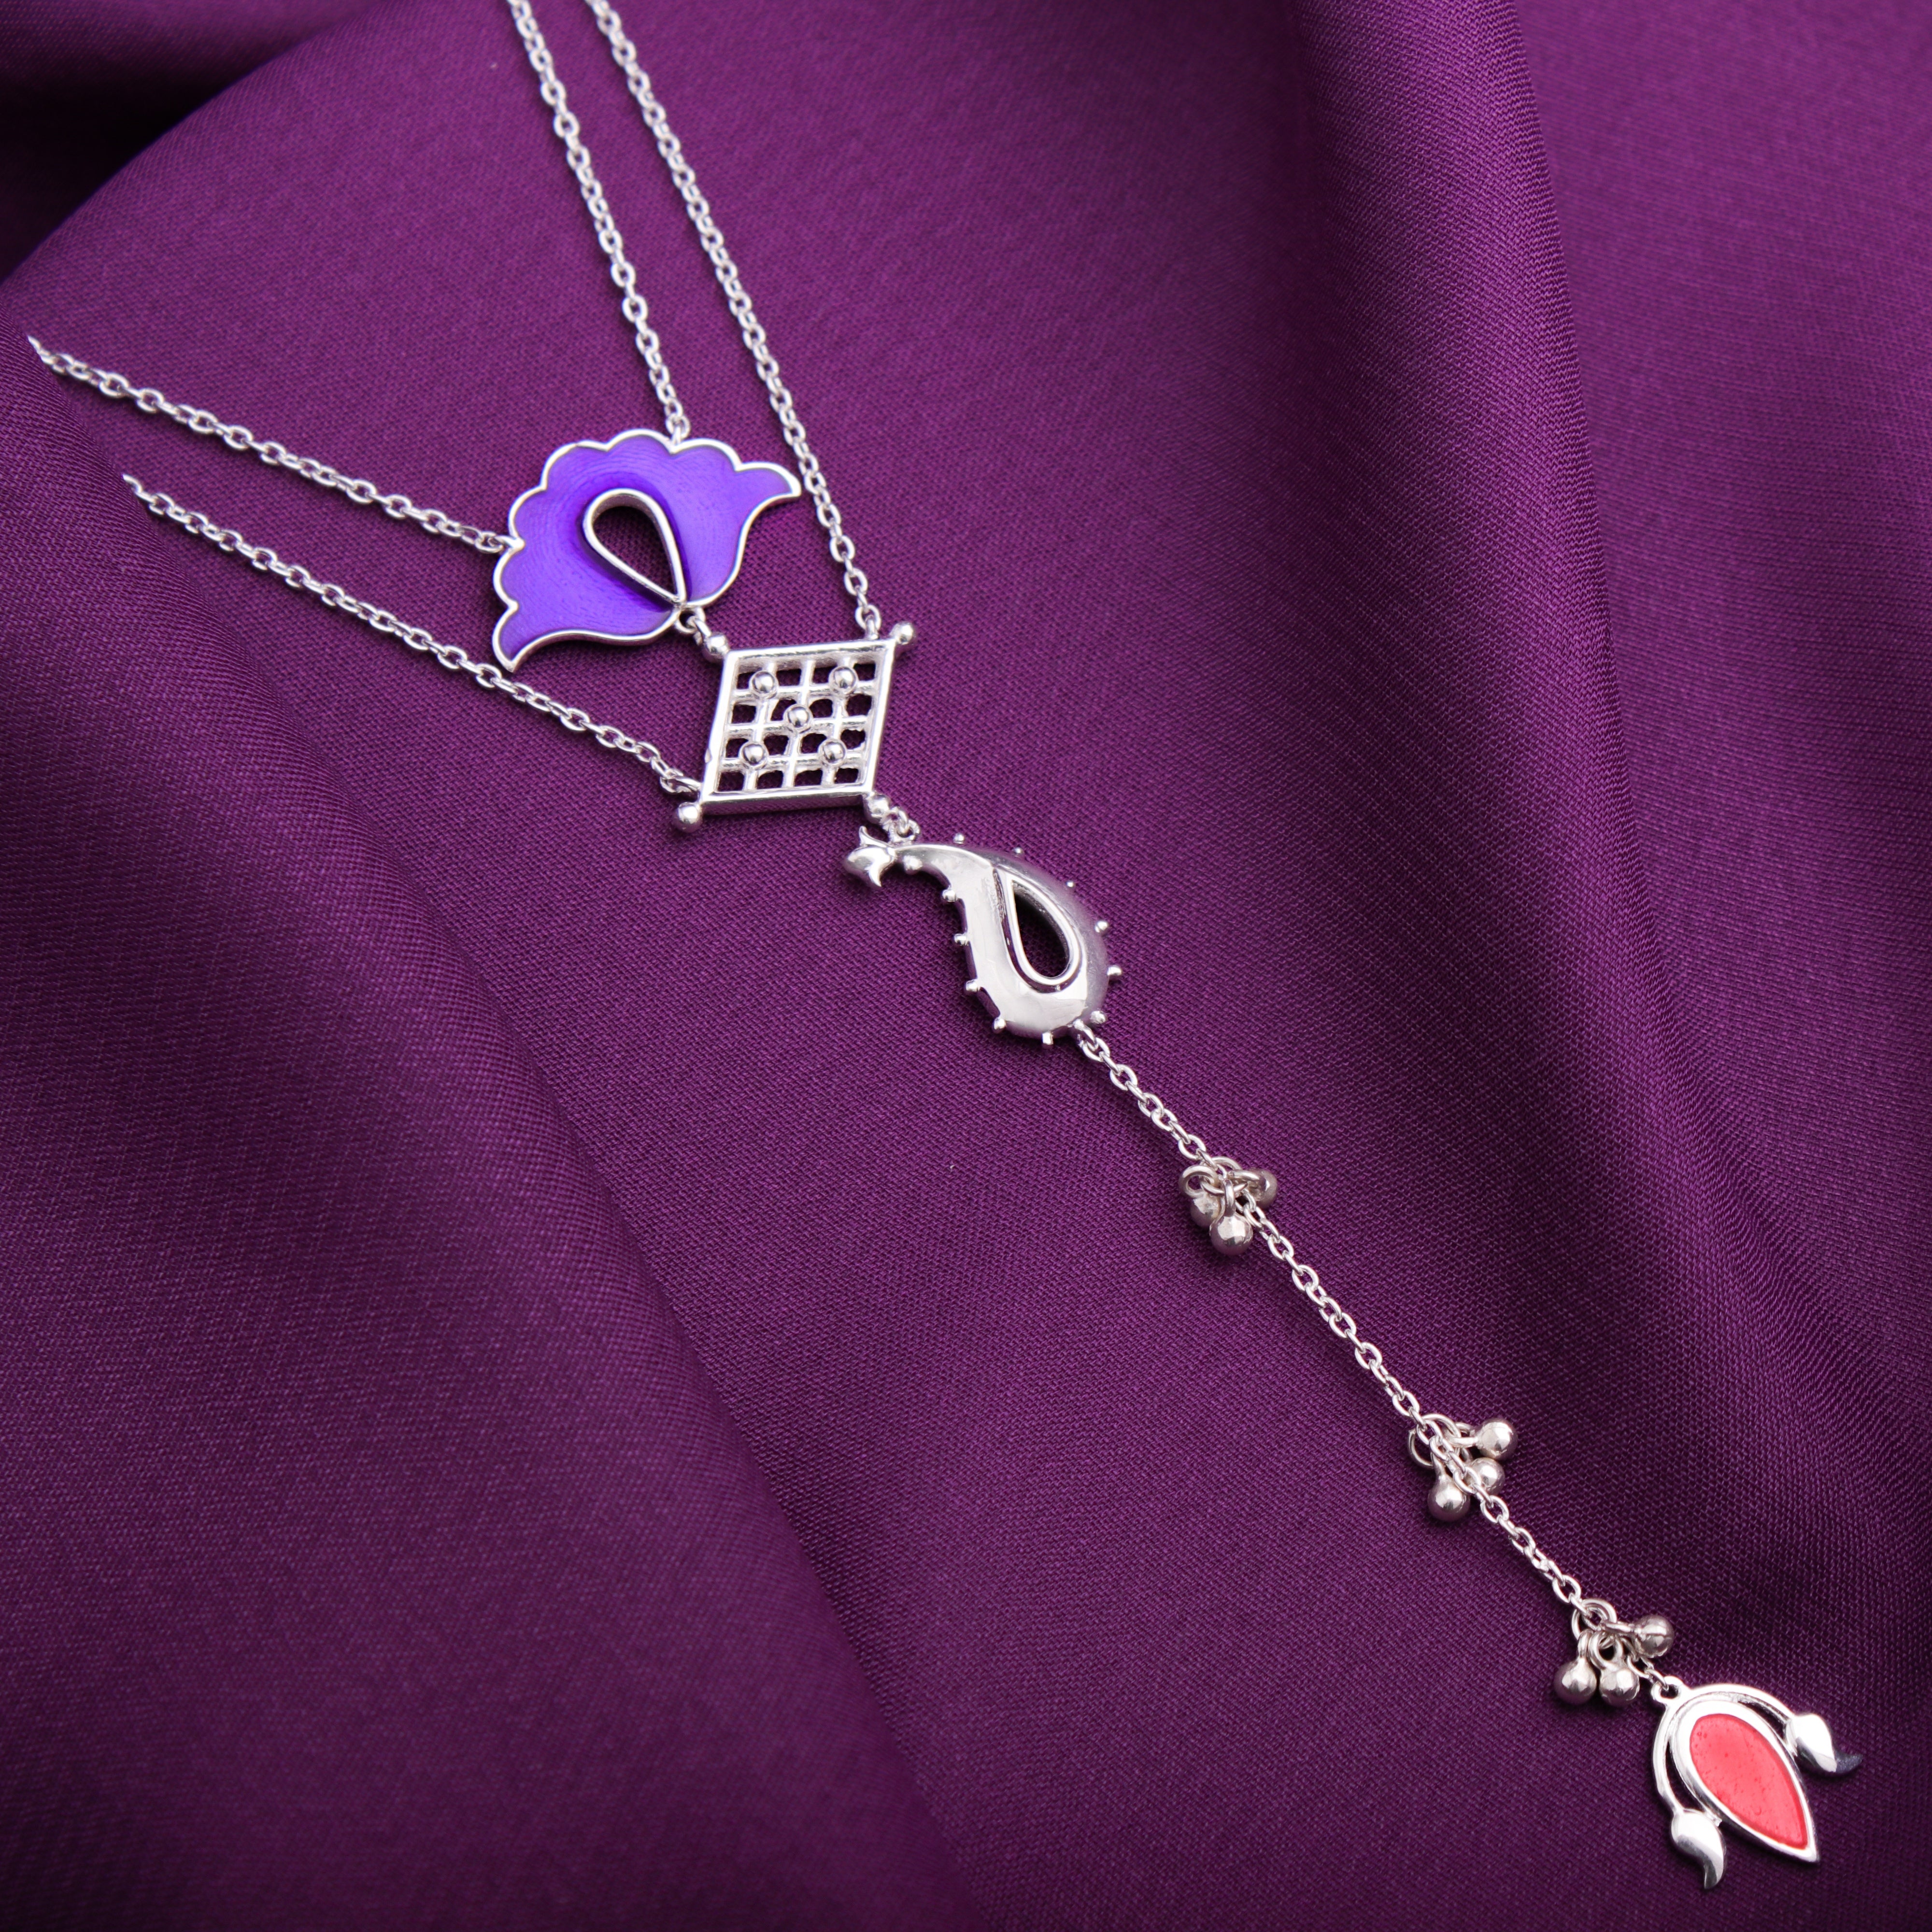 Long Dark Sterling Purple Amethyst Pendant Necklace by Claudio Faccin. Made  in Italy